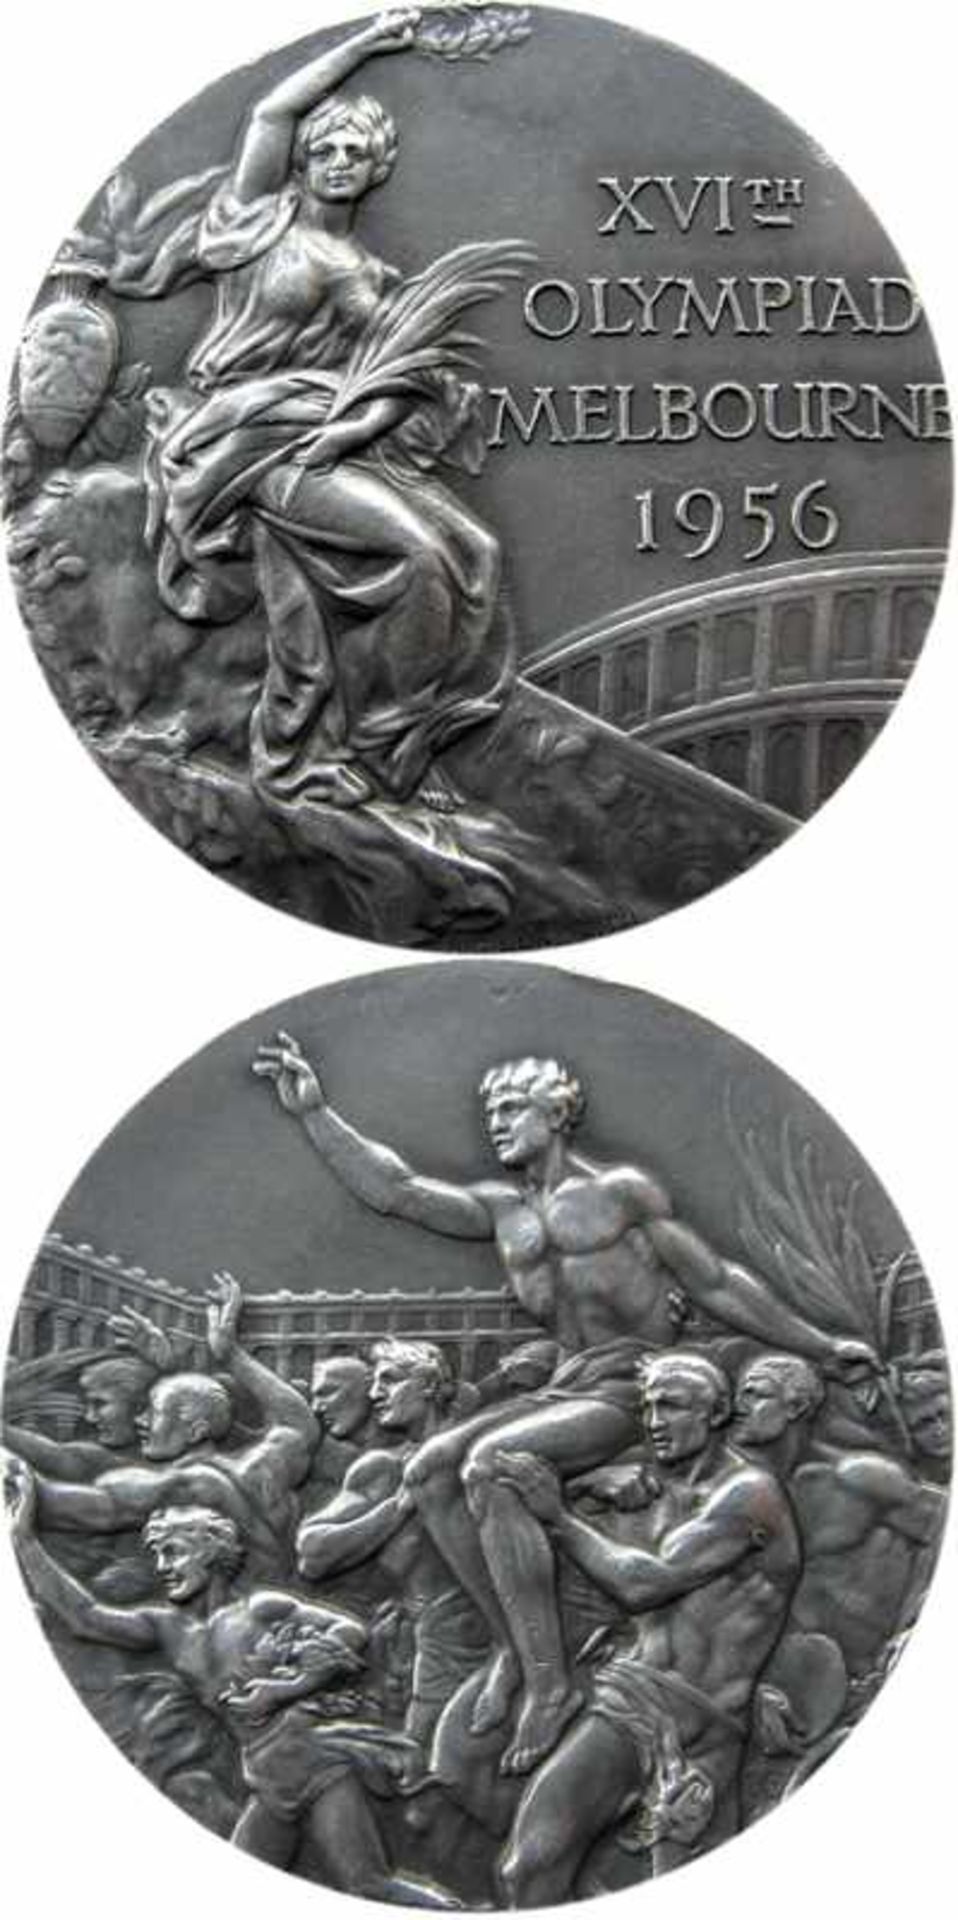 Olympic Games Melbourne 1956 Silver Winner medal - for a 2nd Place at the Olympics. Silver, weight: